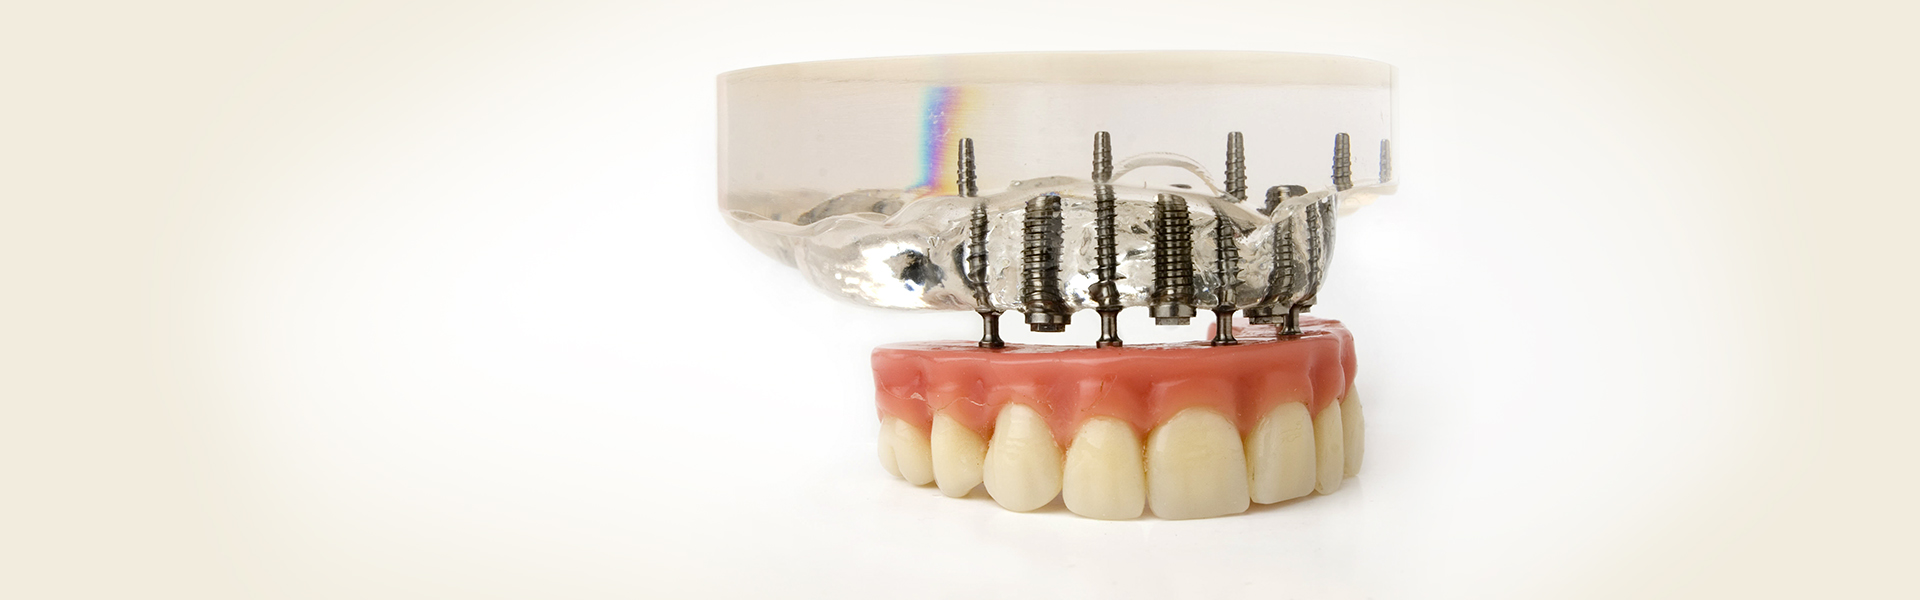 How Long Does It Take To Get Dental Implants?